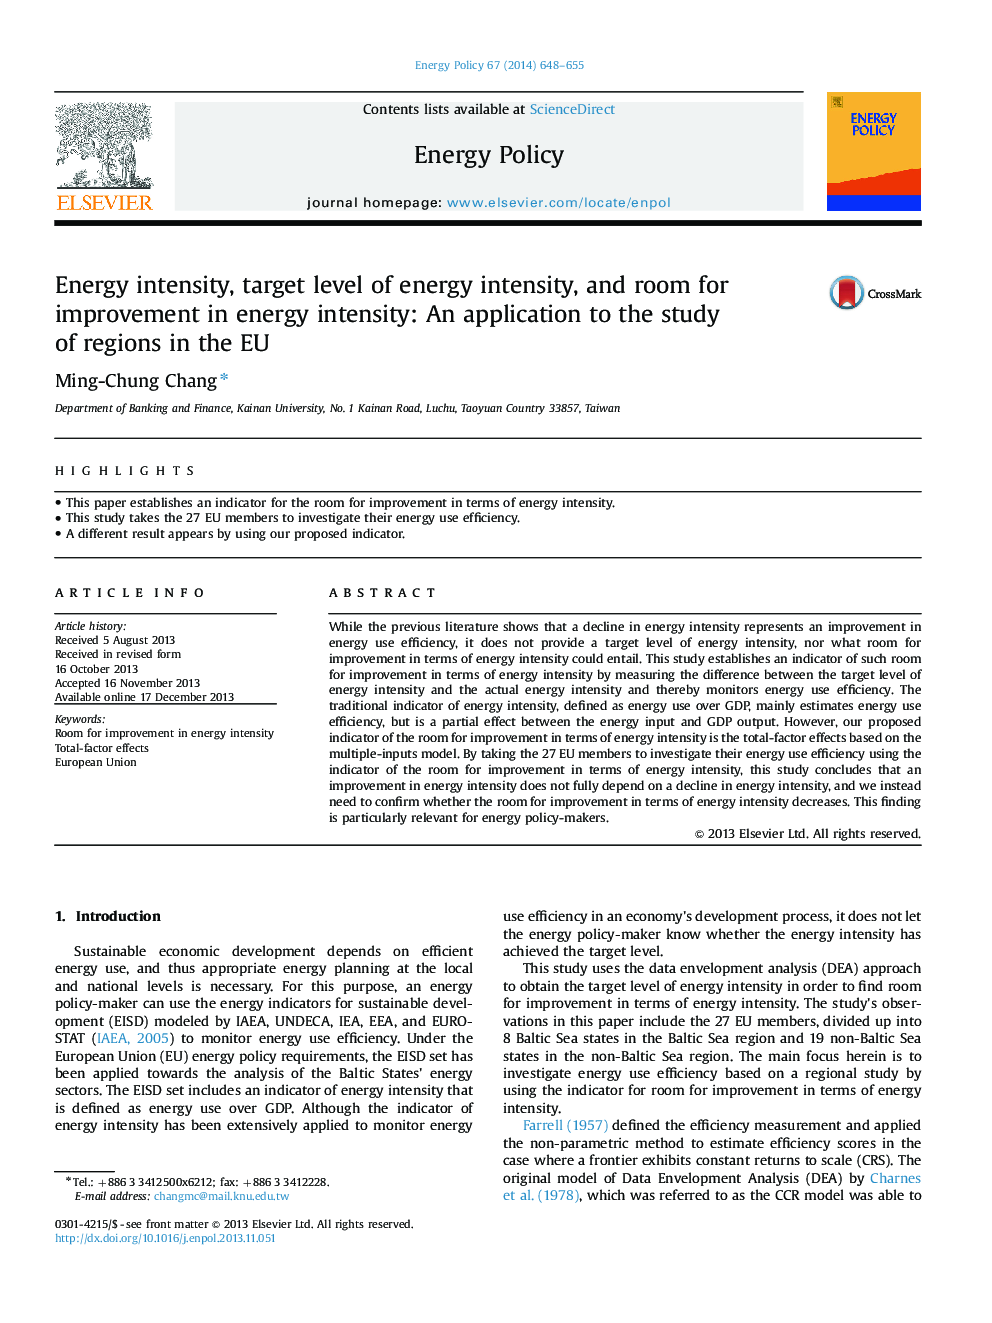 Energy intensity, target level of energy intensity, and room for improvement in energy intensity: An application to the study of regions in the EU